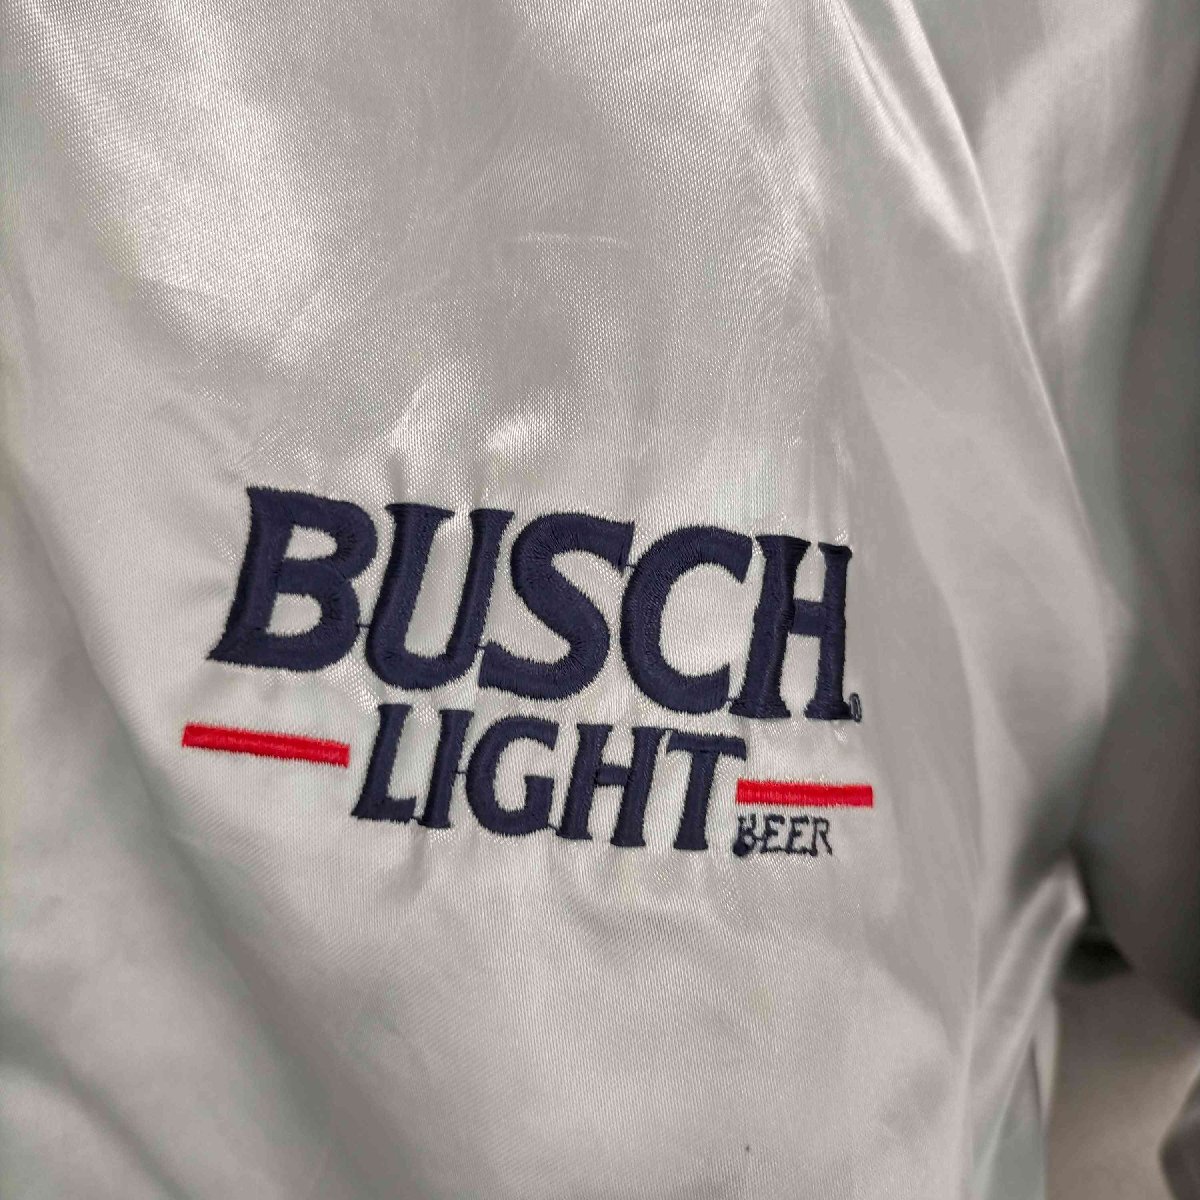 OFFICIAL PRODUCT(フルギ) MADE IN USA BUSCH LIGHT スカジャン メ 中古 古着 0605_画像4